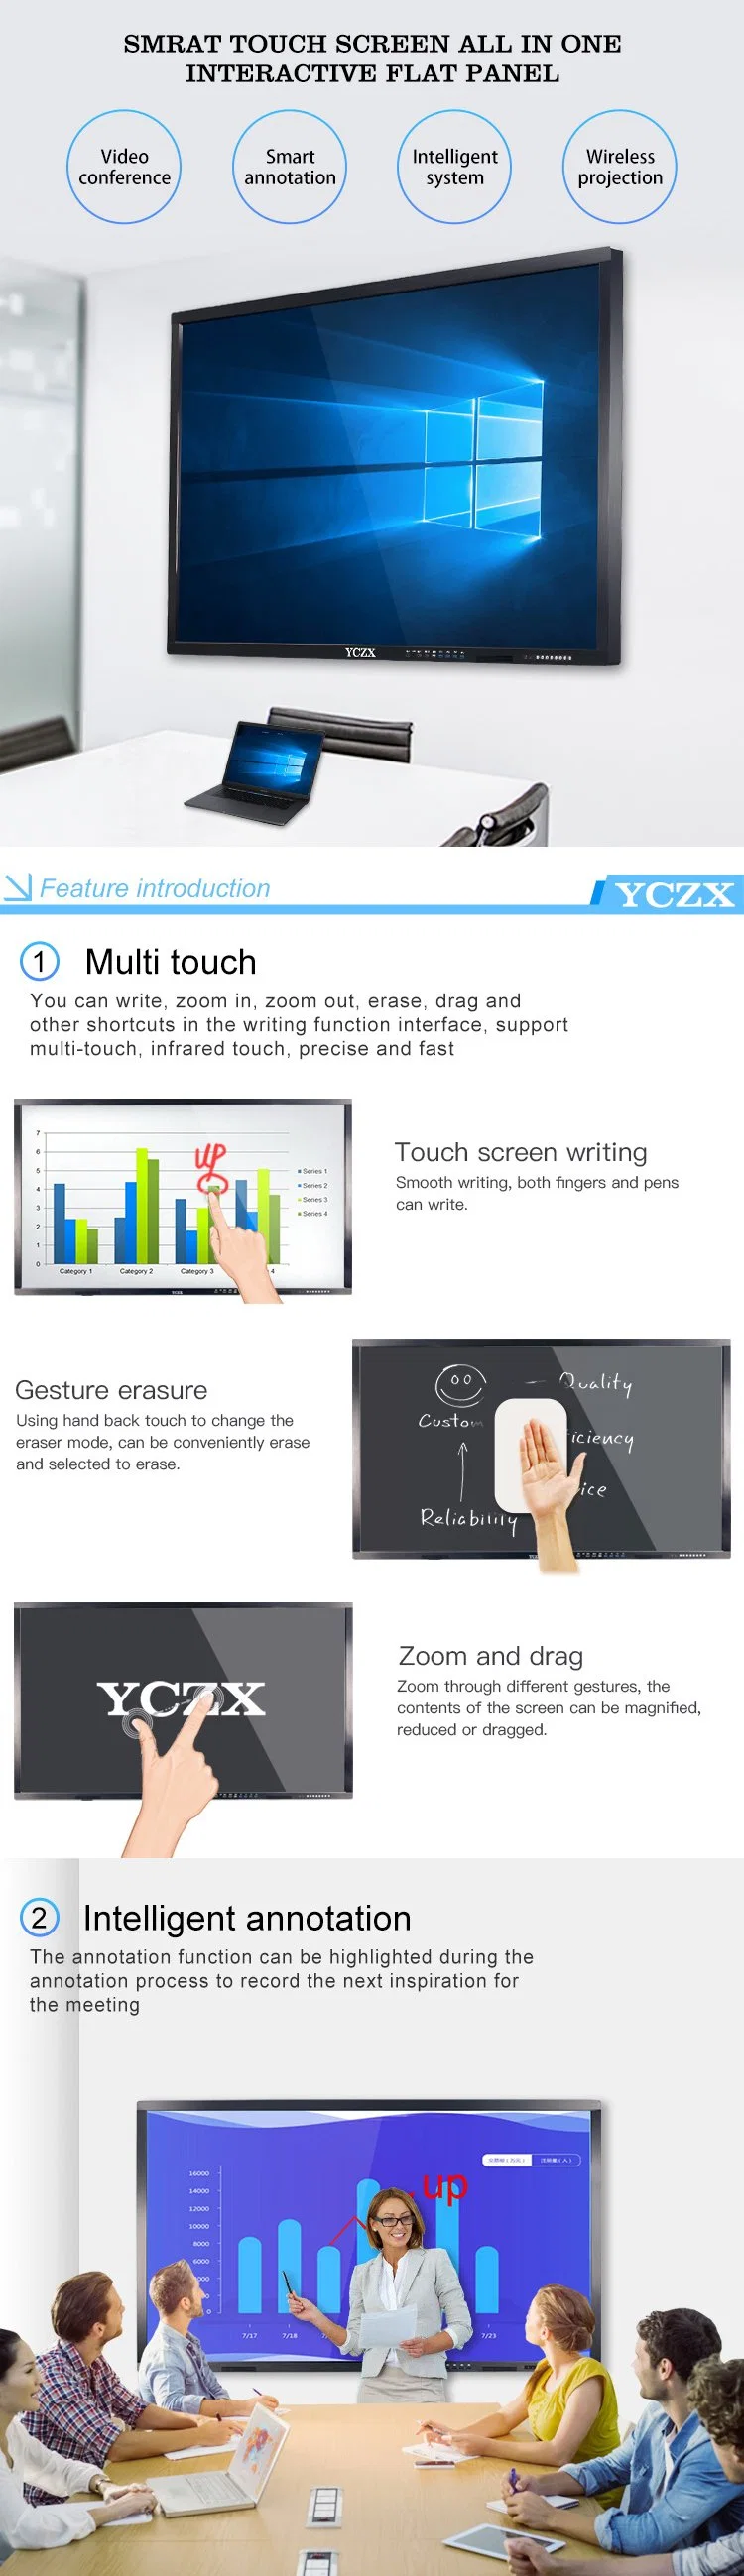 Big Size 4K 98 Inch Interactive Smart Board Education All in One Conference Smart Touch Screen